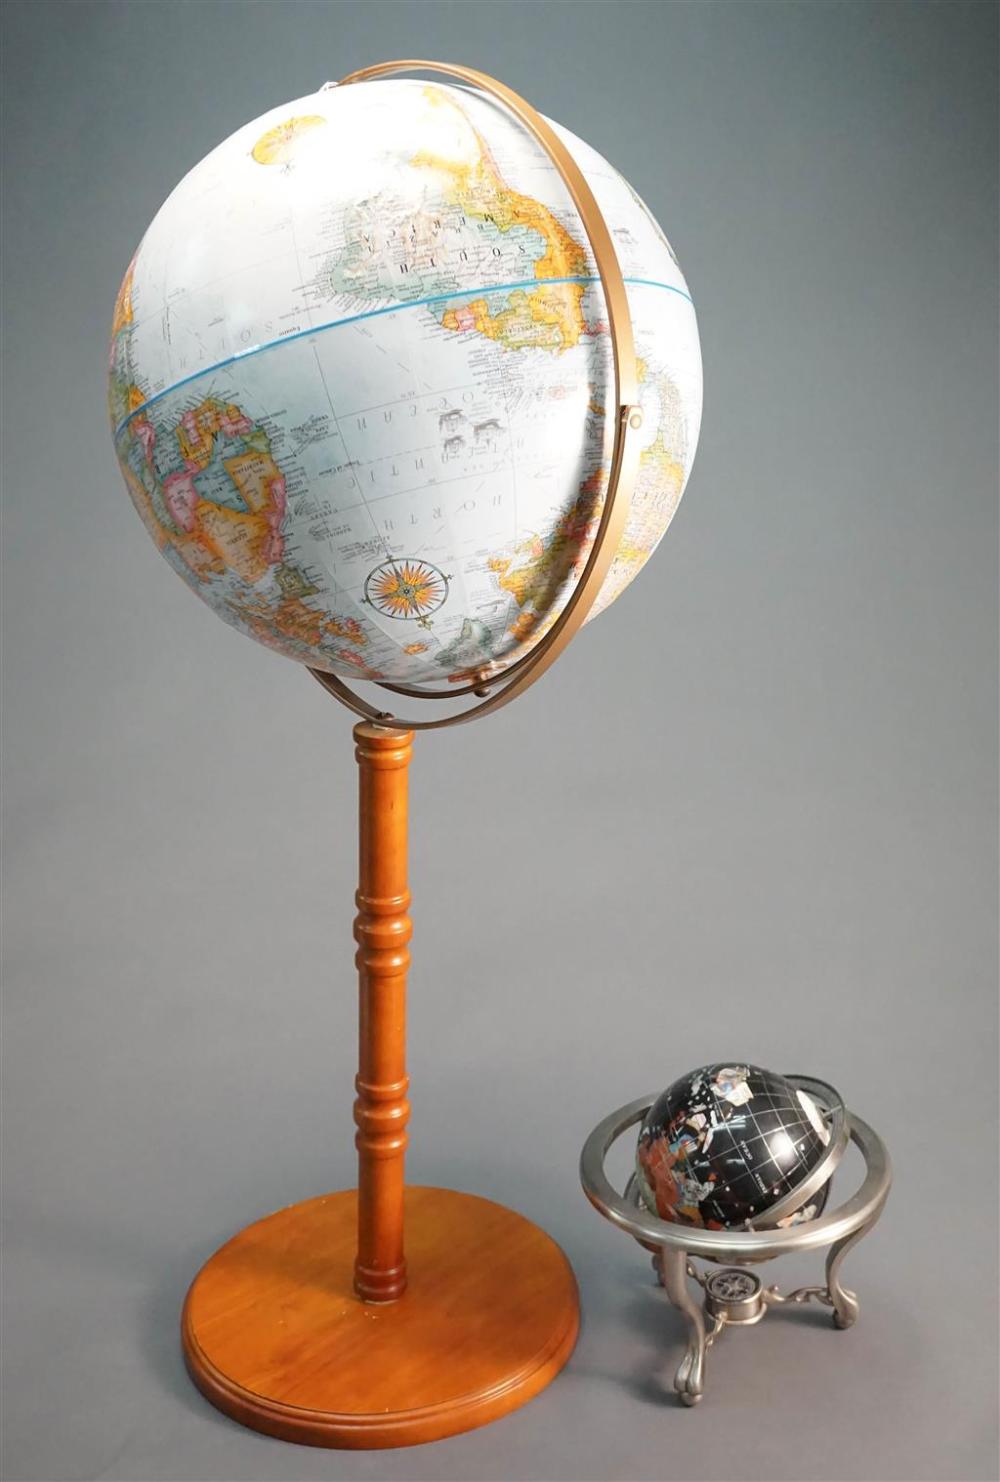 STANDING 12-INCH LIBRARY GLOBE